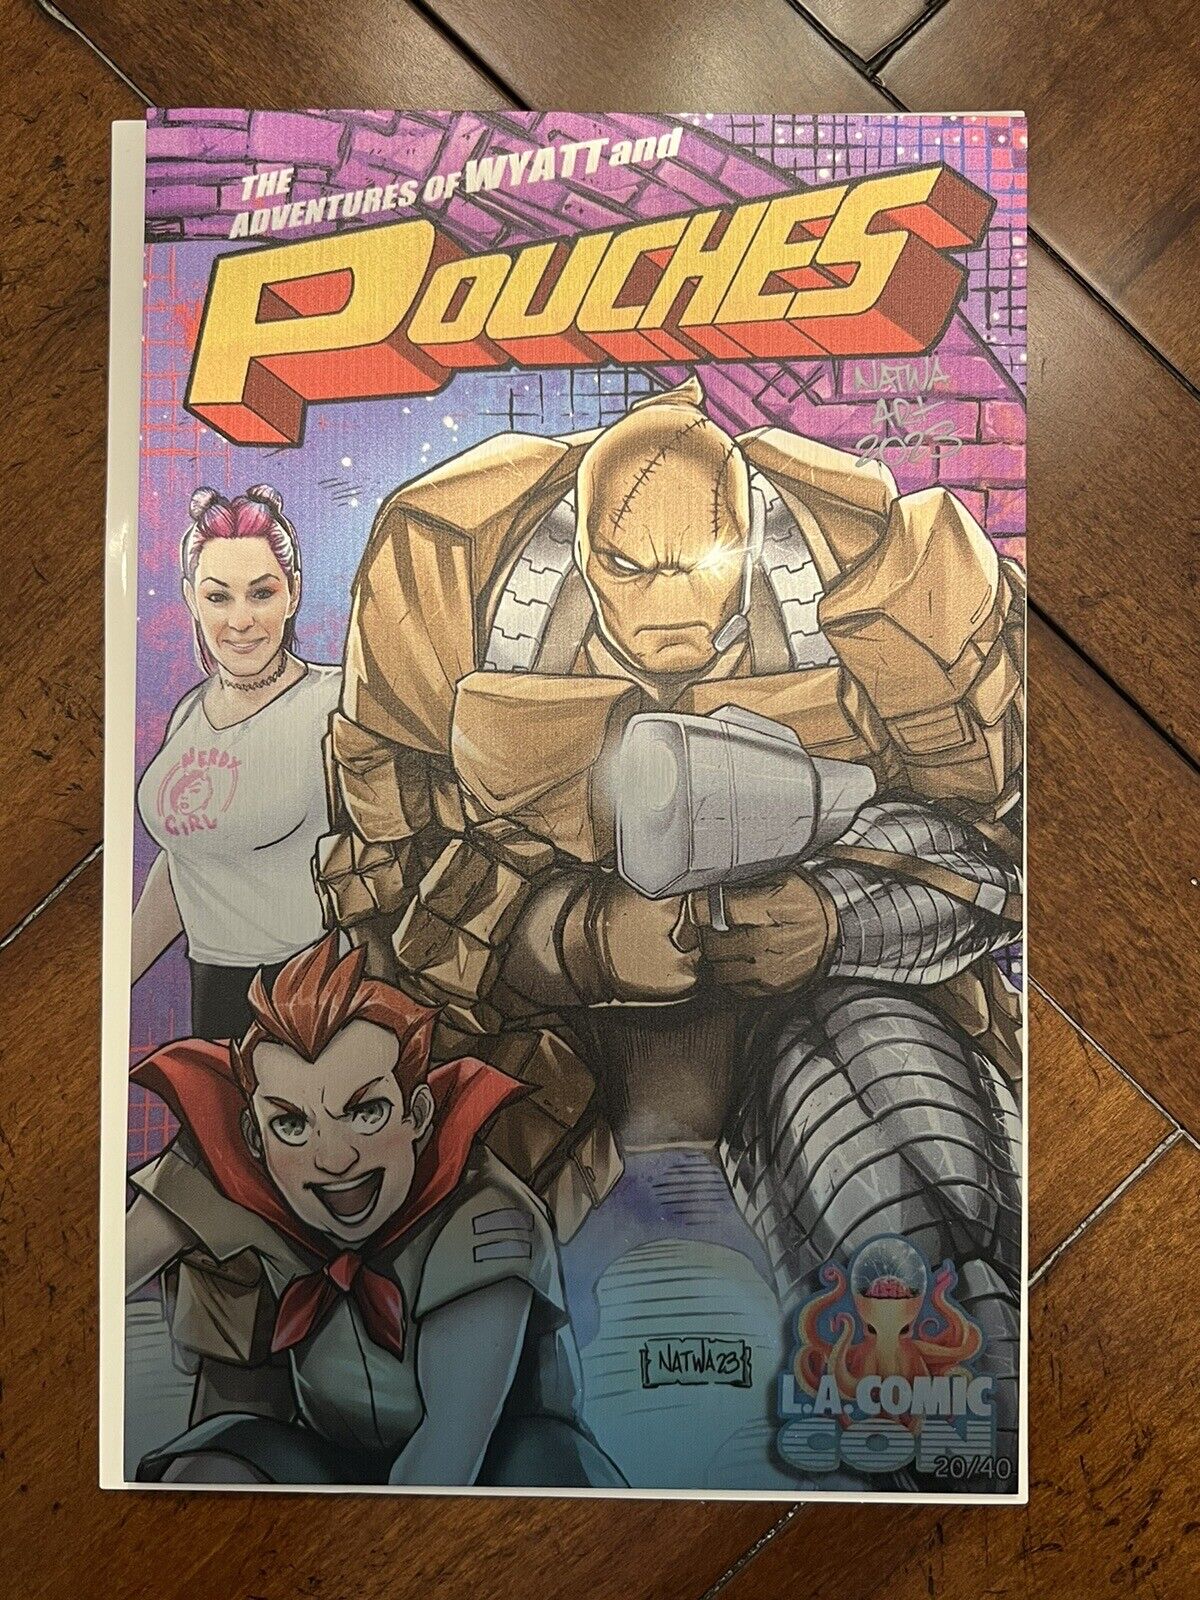 The Adventures of Wyatt & Pouches Metal Cover LACC 2023 #20/40 Signed by NATWA